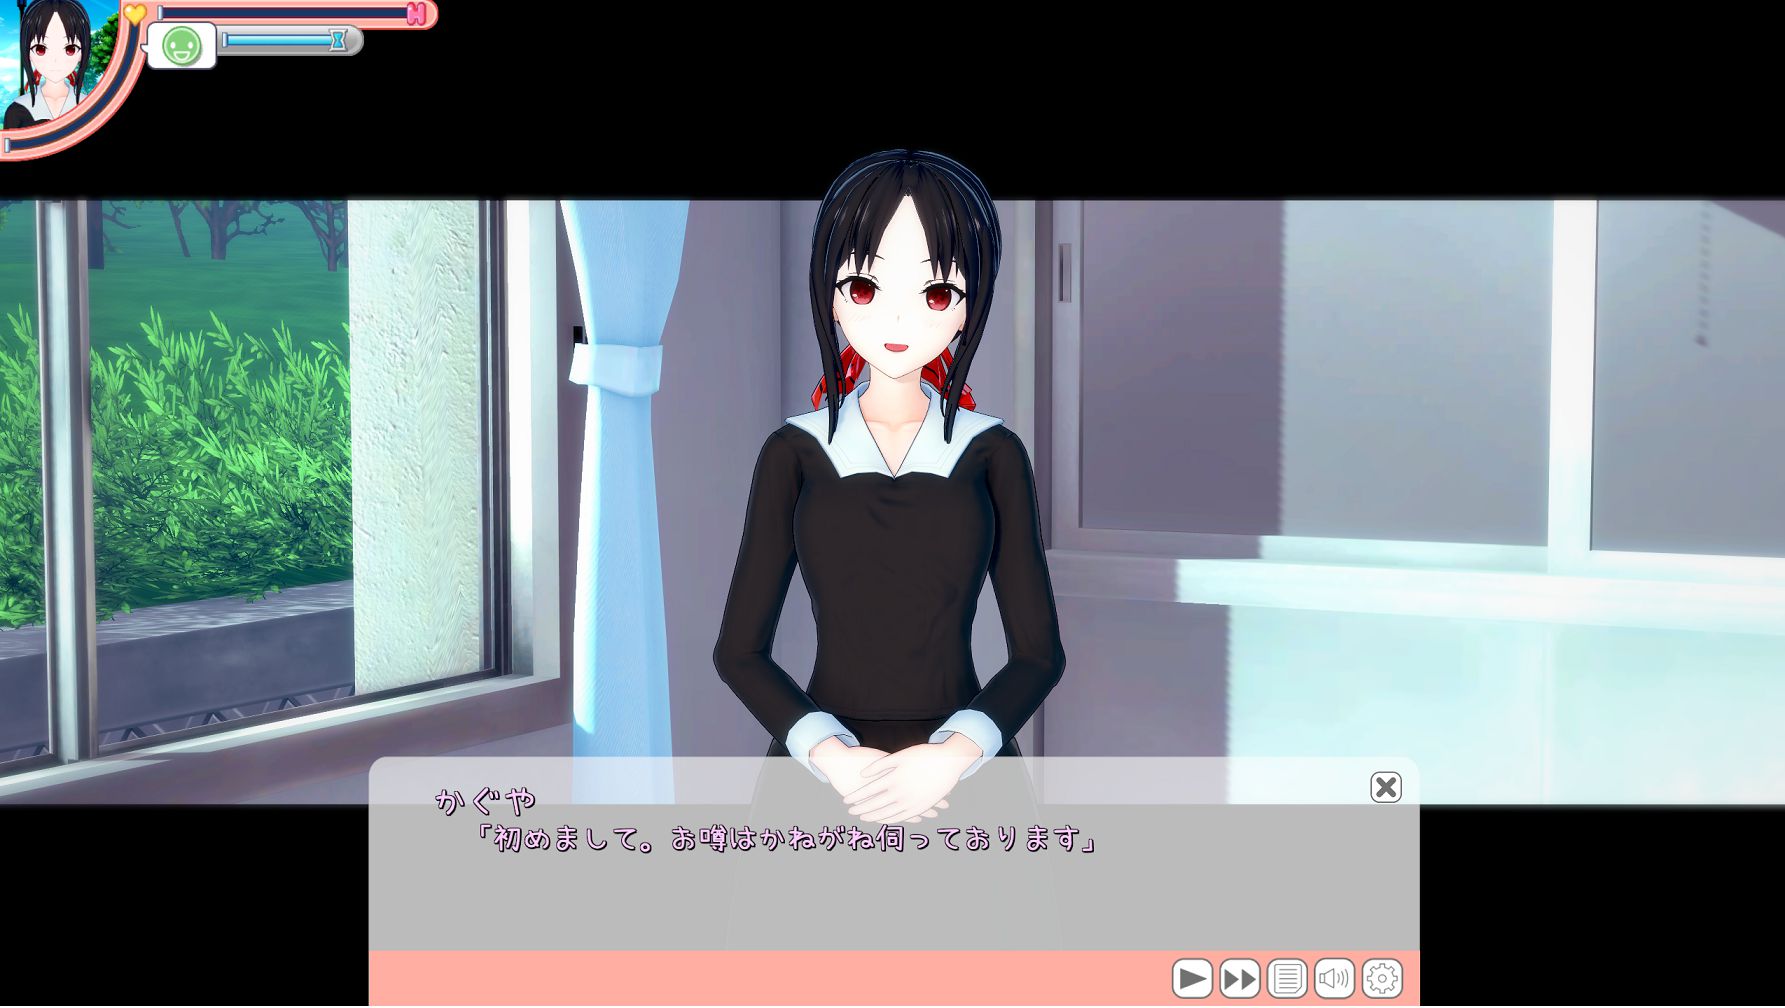 【Good news】Eroge "Koikatsu", too much fun to etch with characters of famous anime games wwwwwww 7